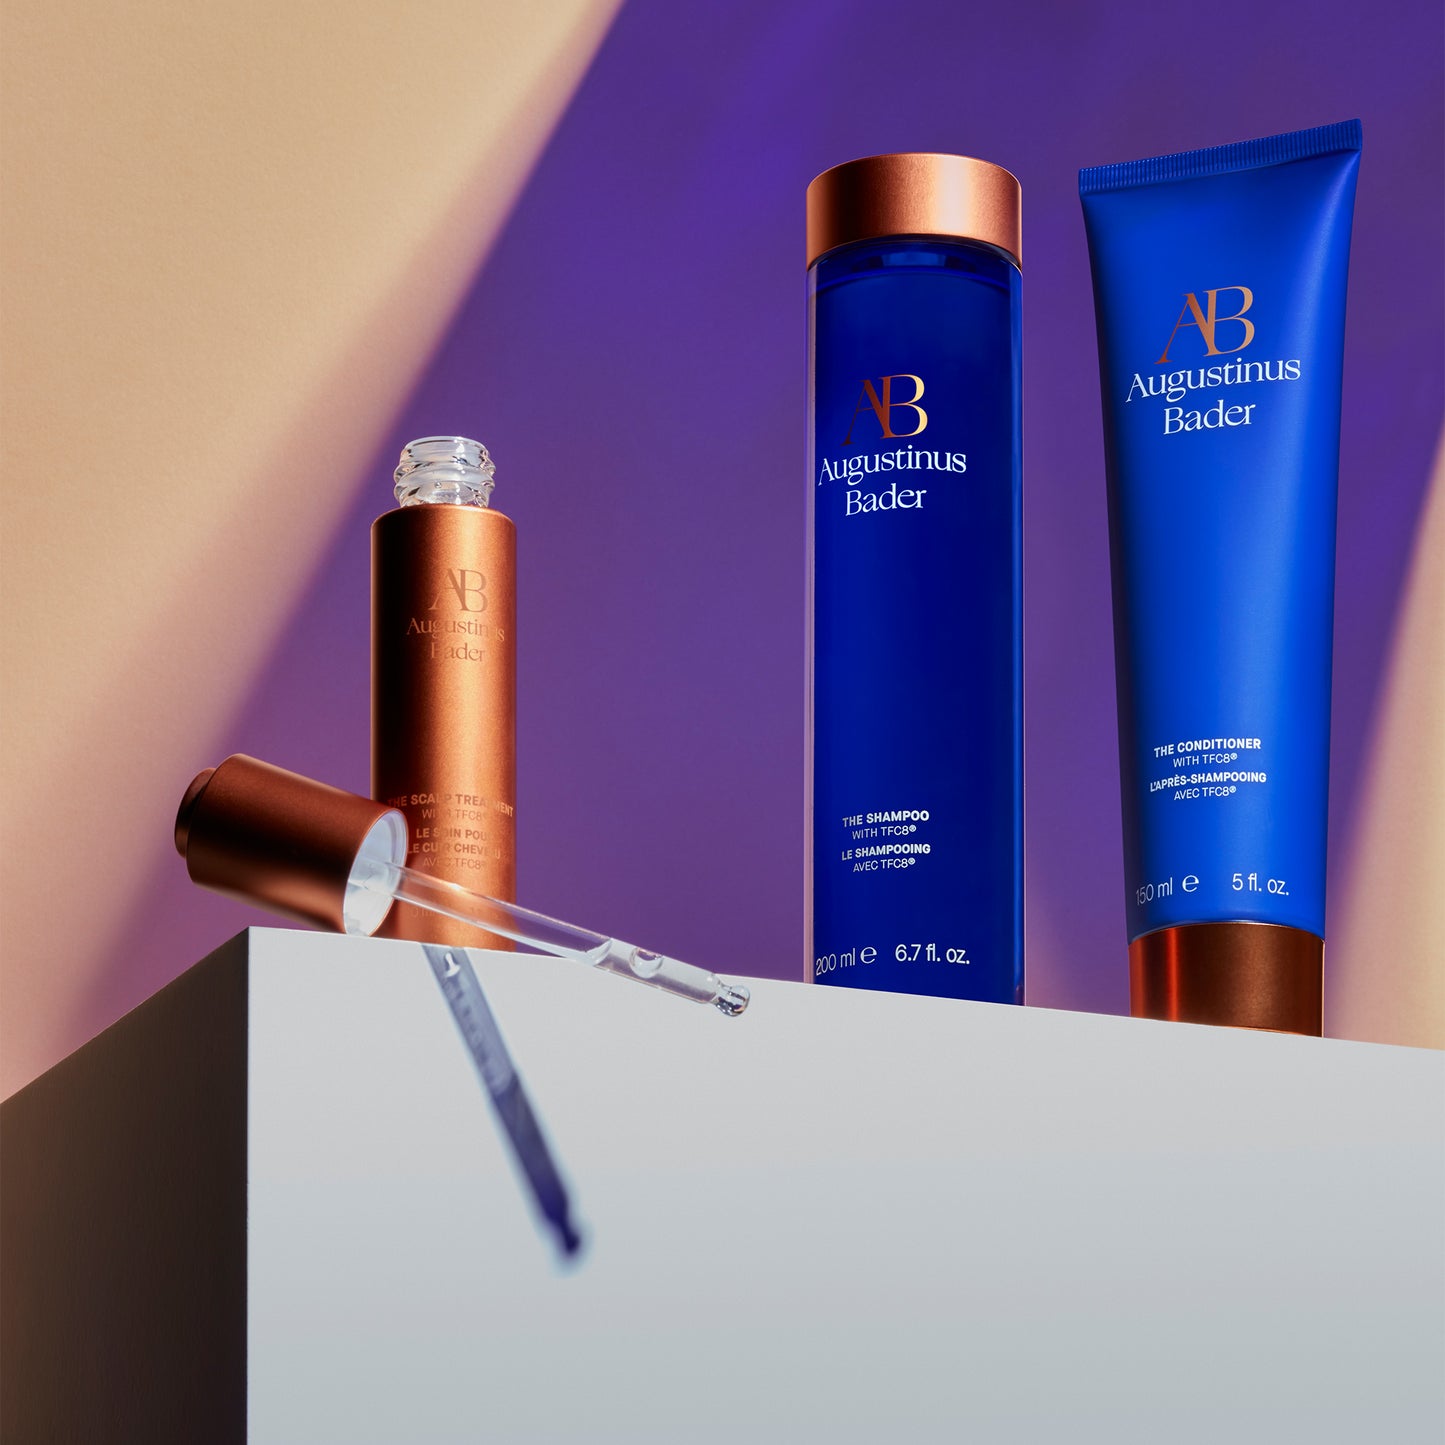 The Revitalizing Haircare System